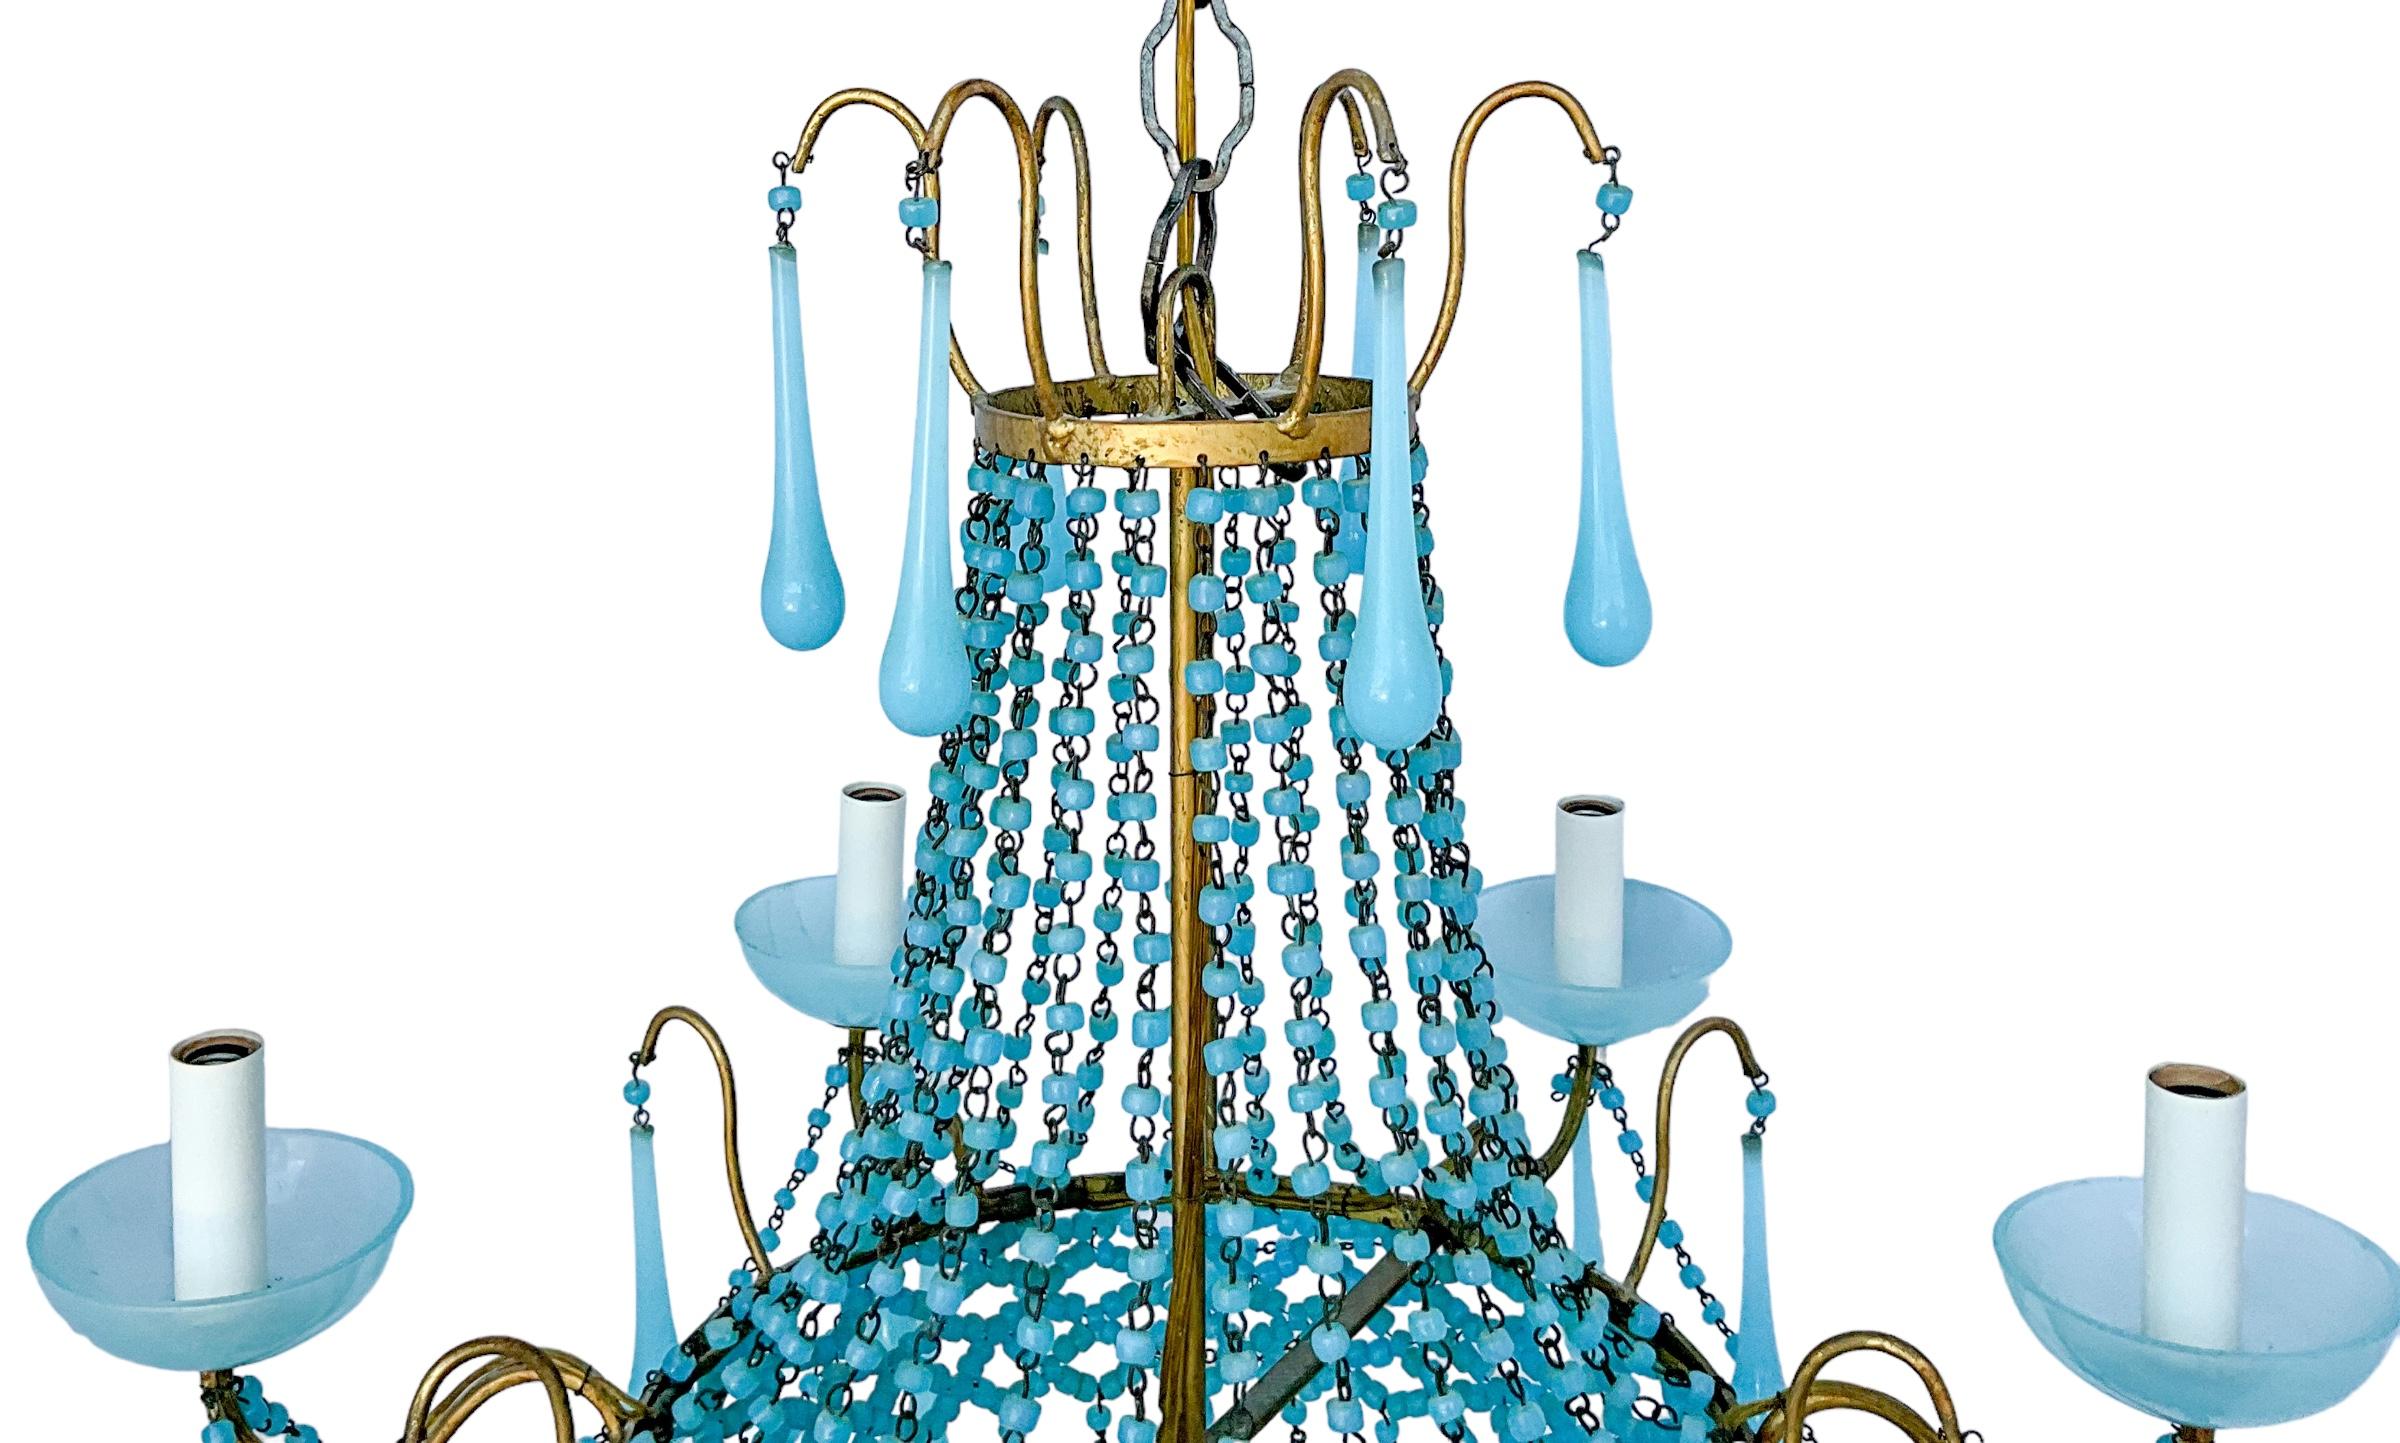 Rococo Late 20th Century Italian Turquoise Crystal & Gilt Metal Chandelier - 6 Arm  For Sale